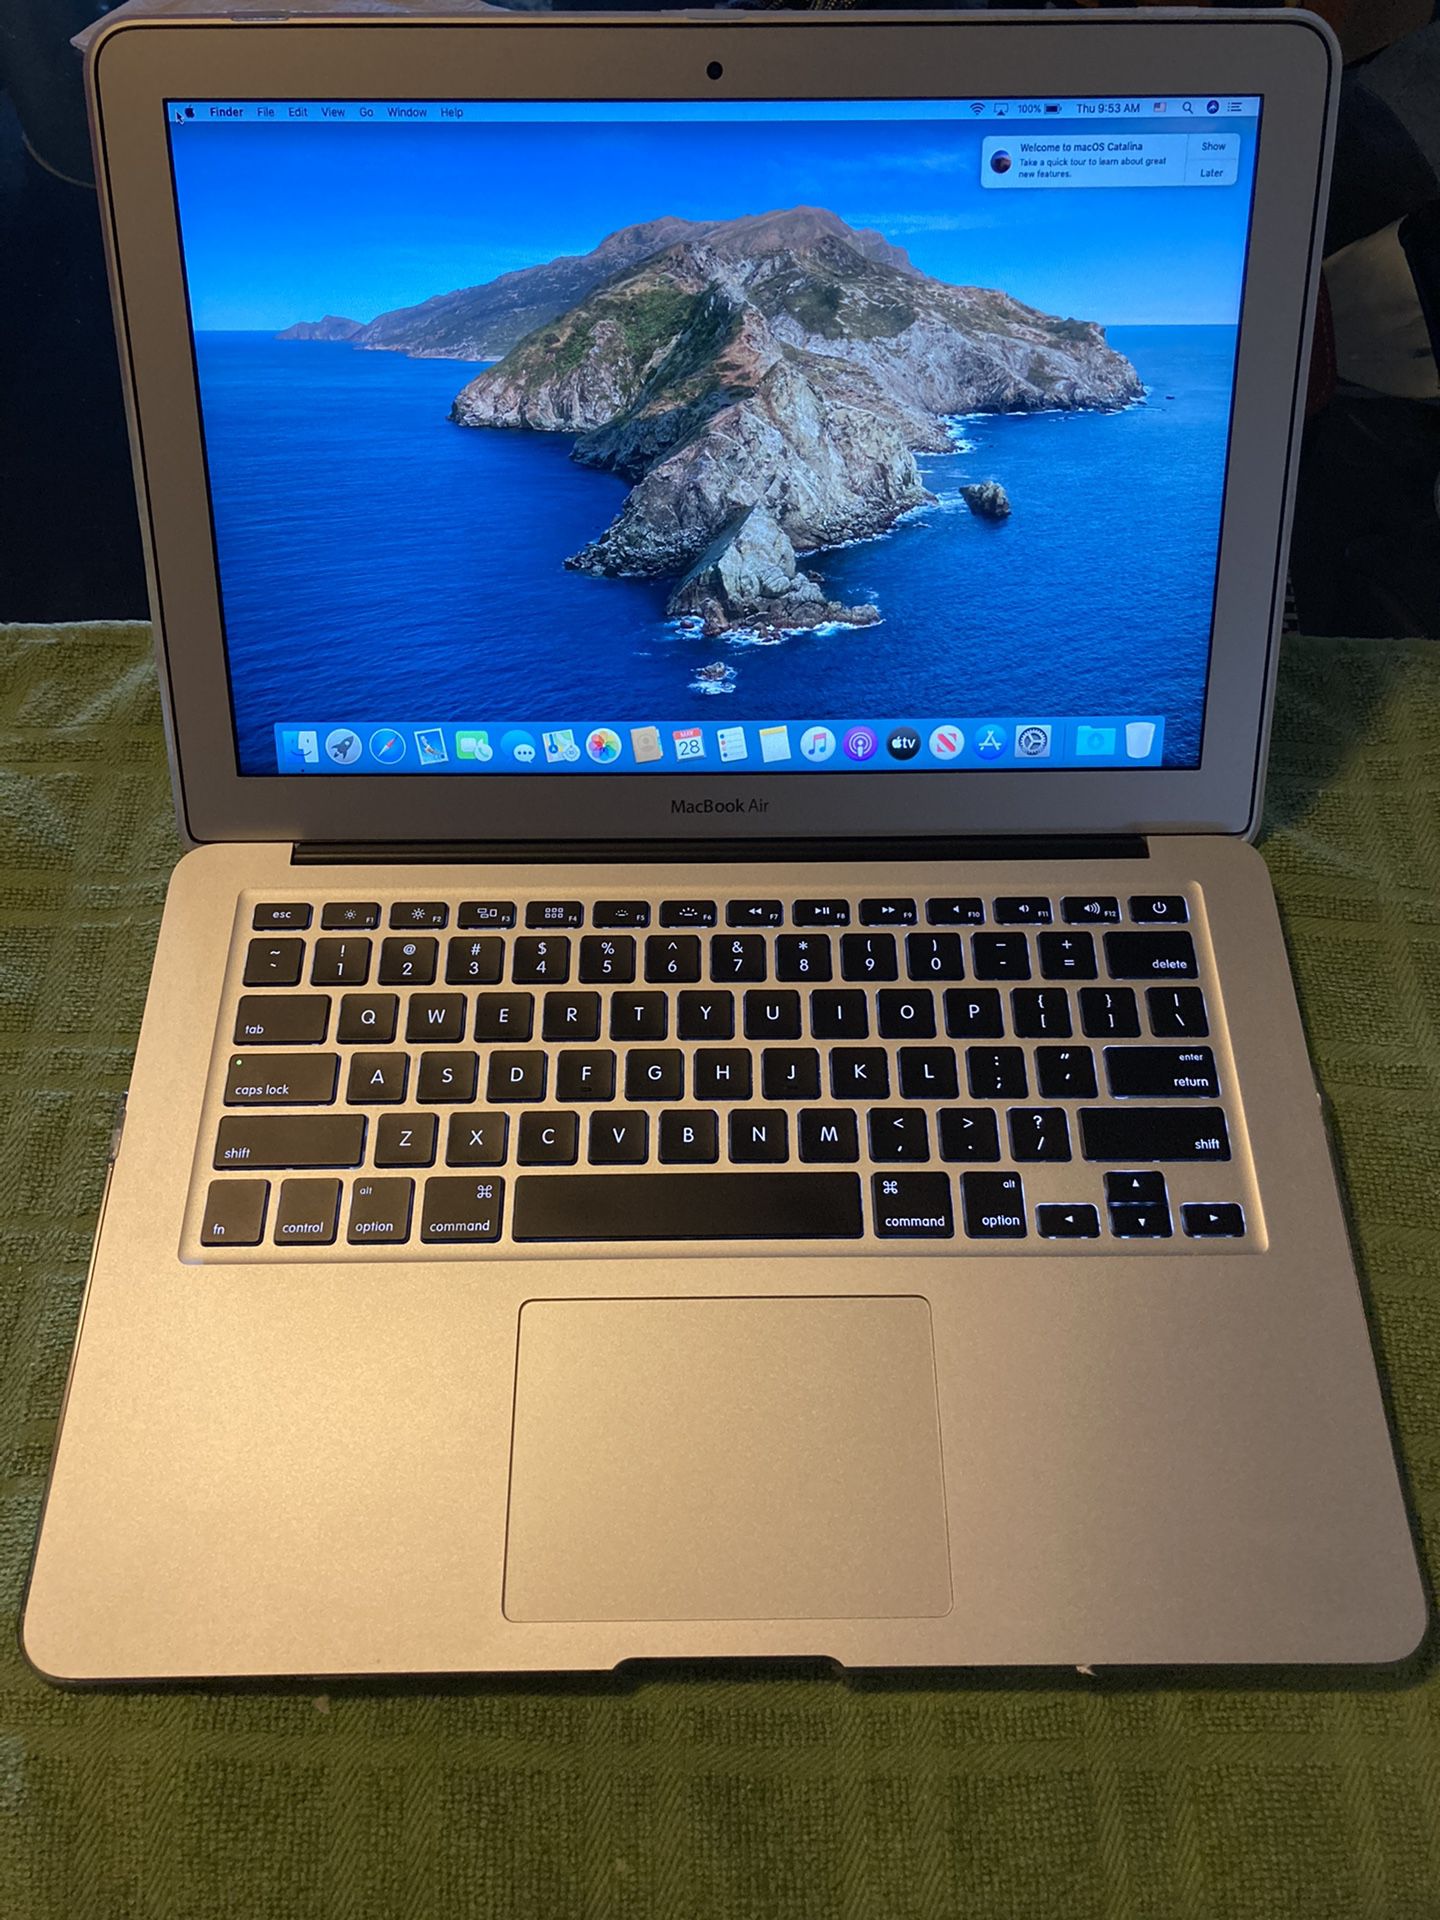 Macbook AIR 13 inch Early 2015. Better than new one